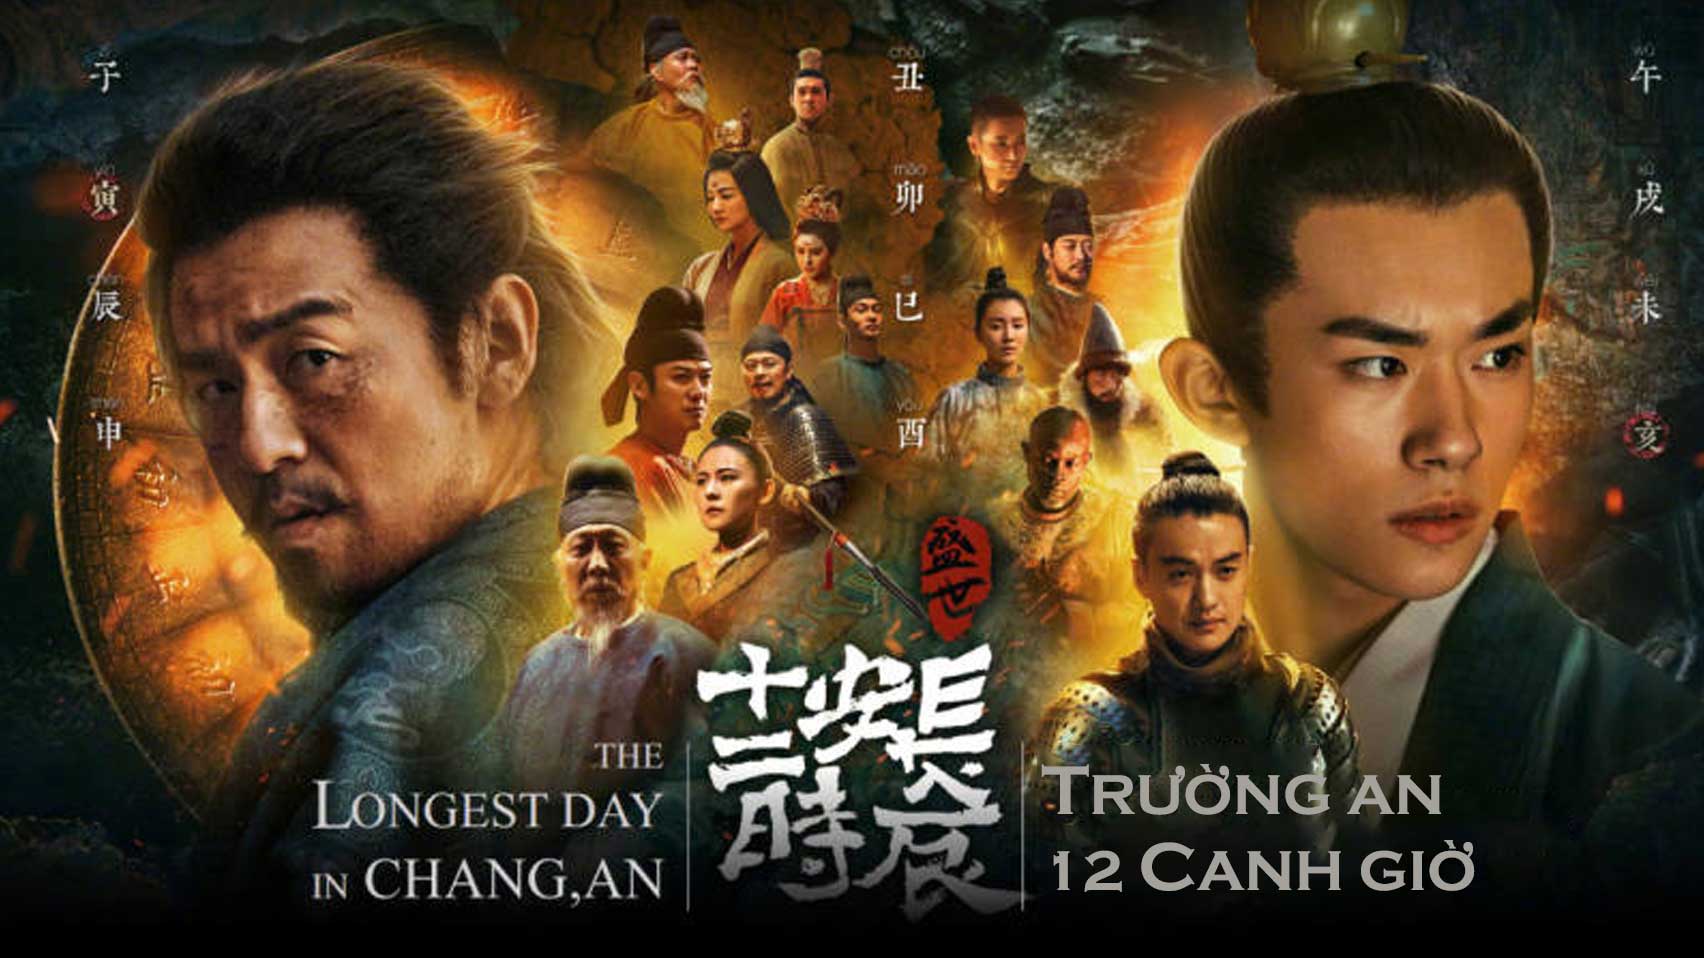 Trường-an-12-canh-giờ-banner